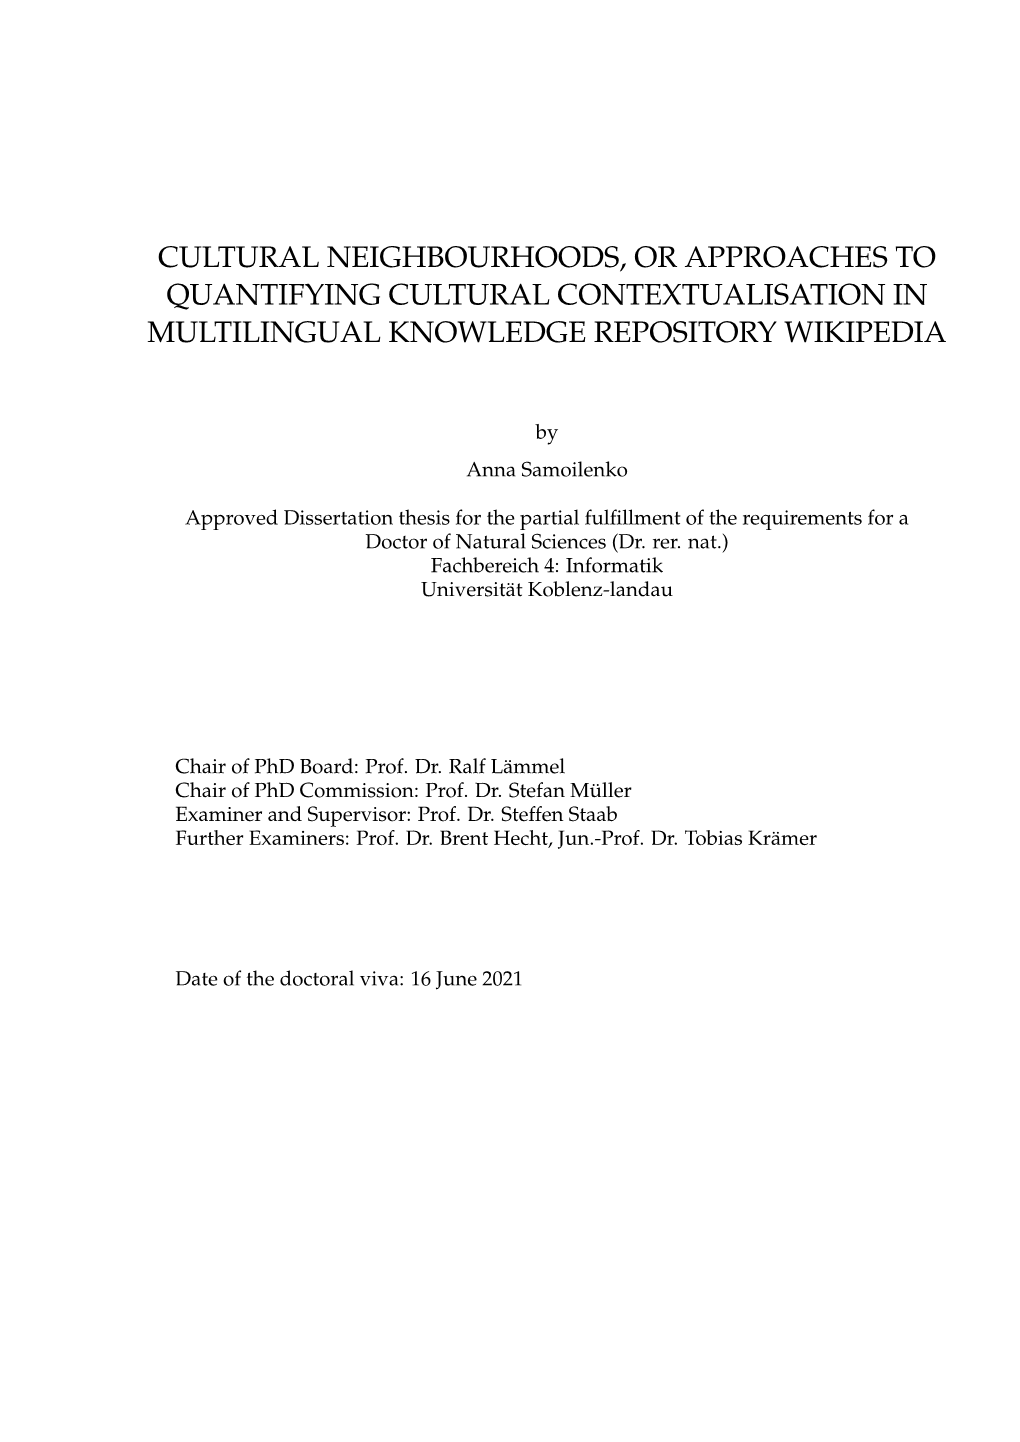 Cultural Neighbourhoods, Or Approaches to Quantifying Cultural Contextualisation in Multilingual Knowledge Repository Wikipedia